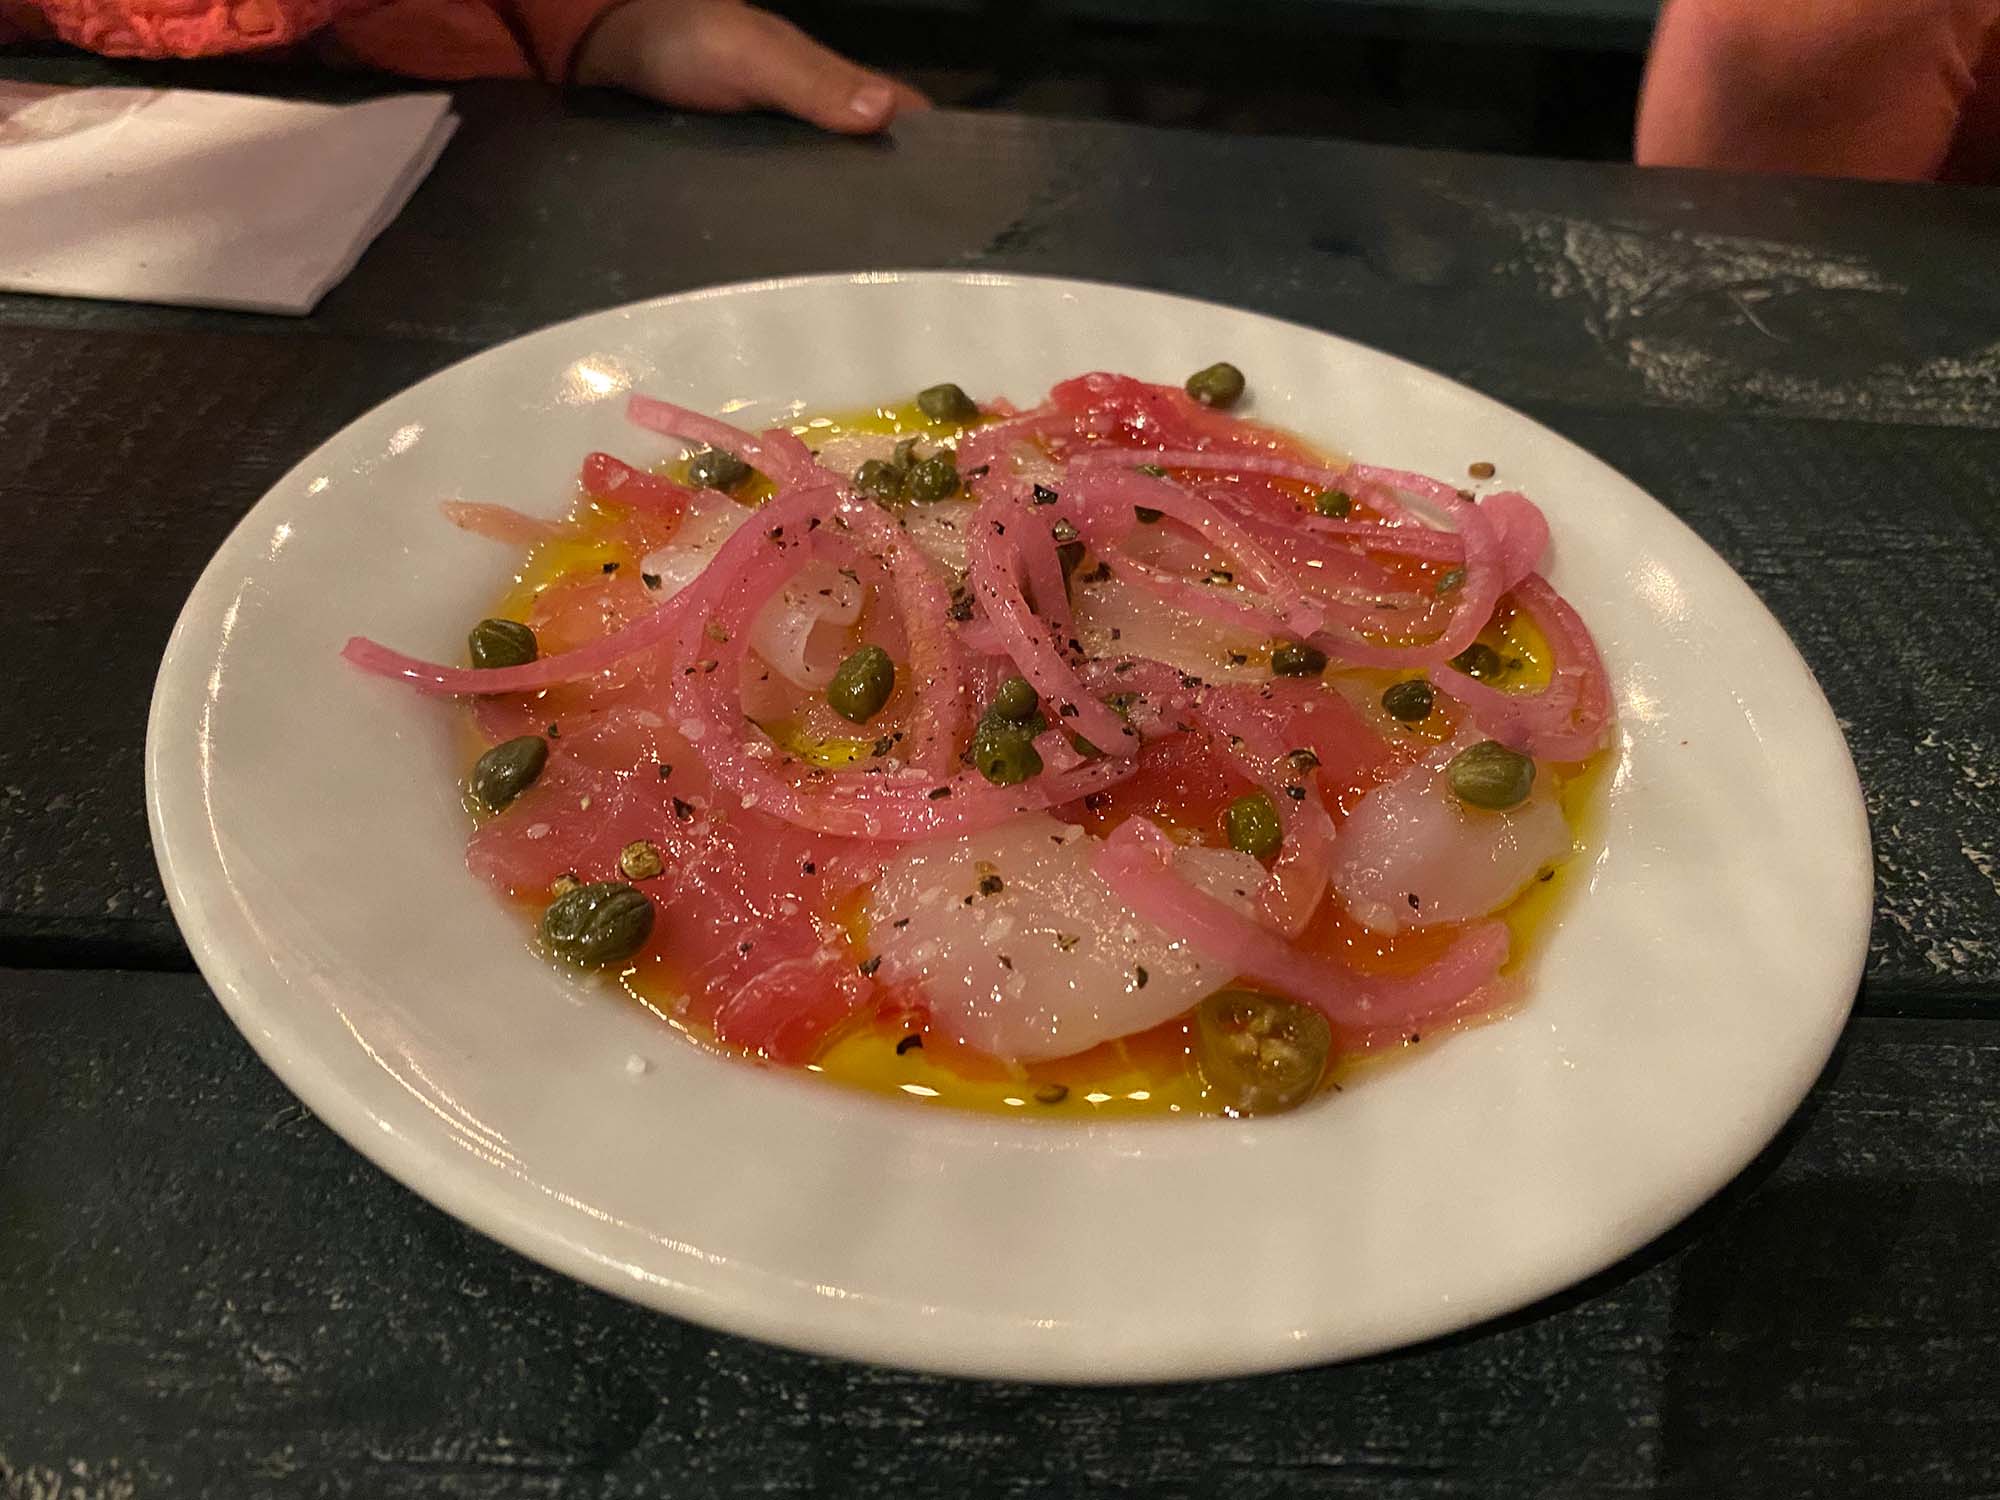 Seafood crudo topped with capers and red onions, served in a shallow white bowl.